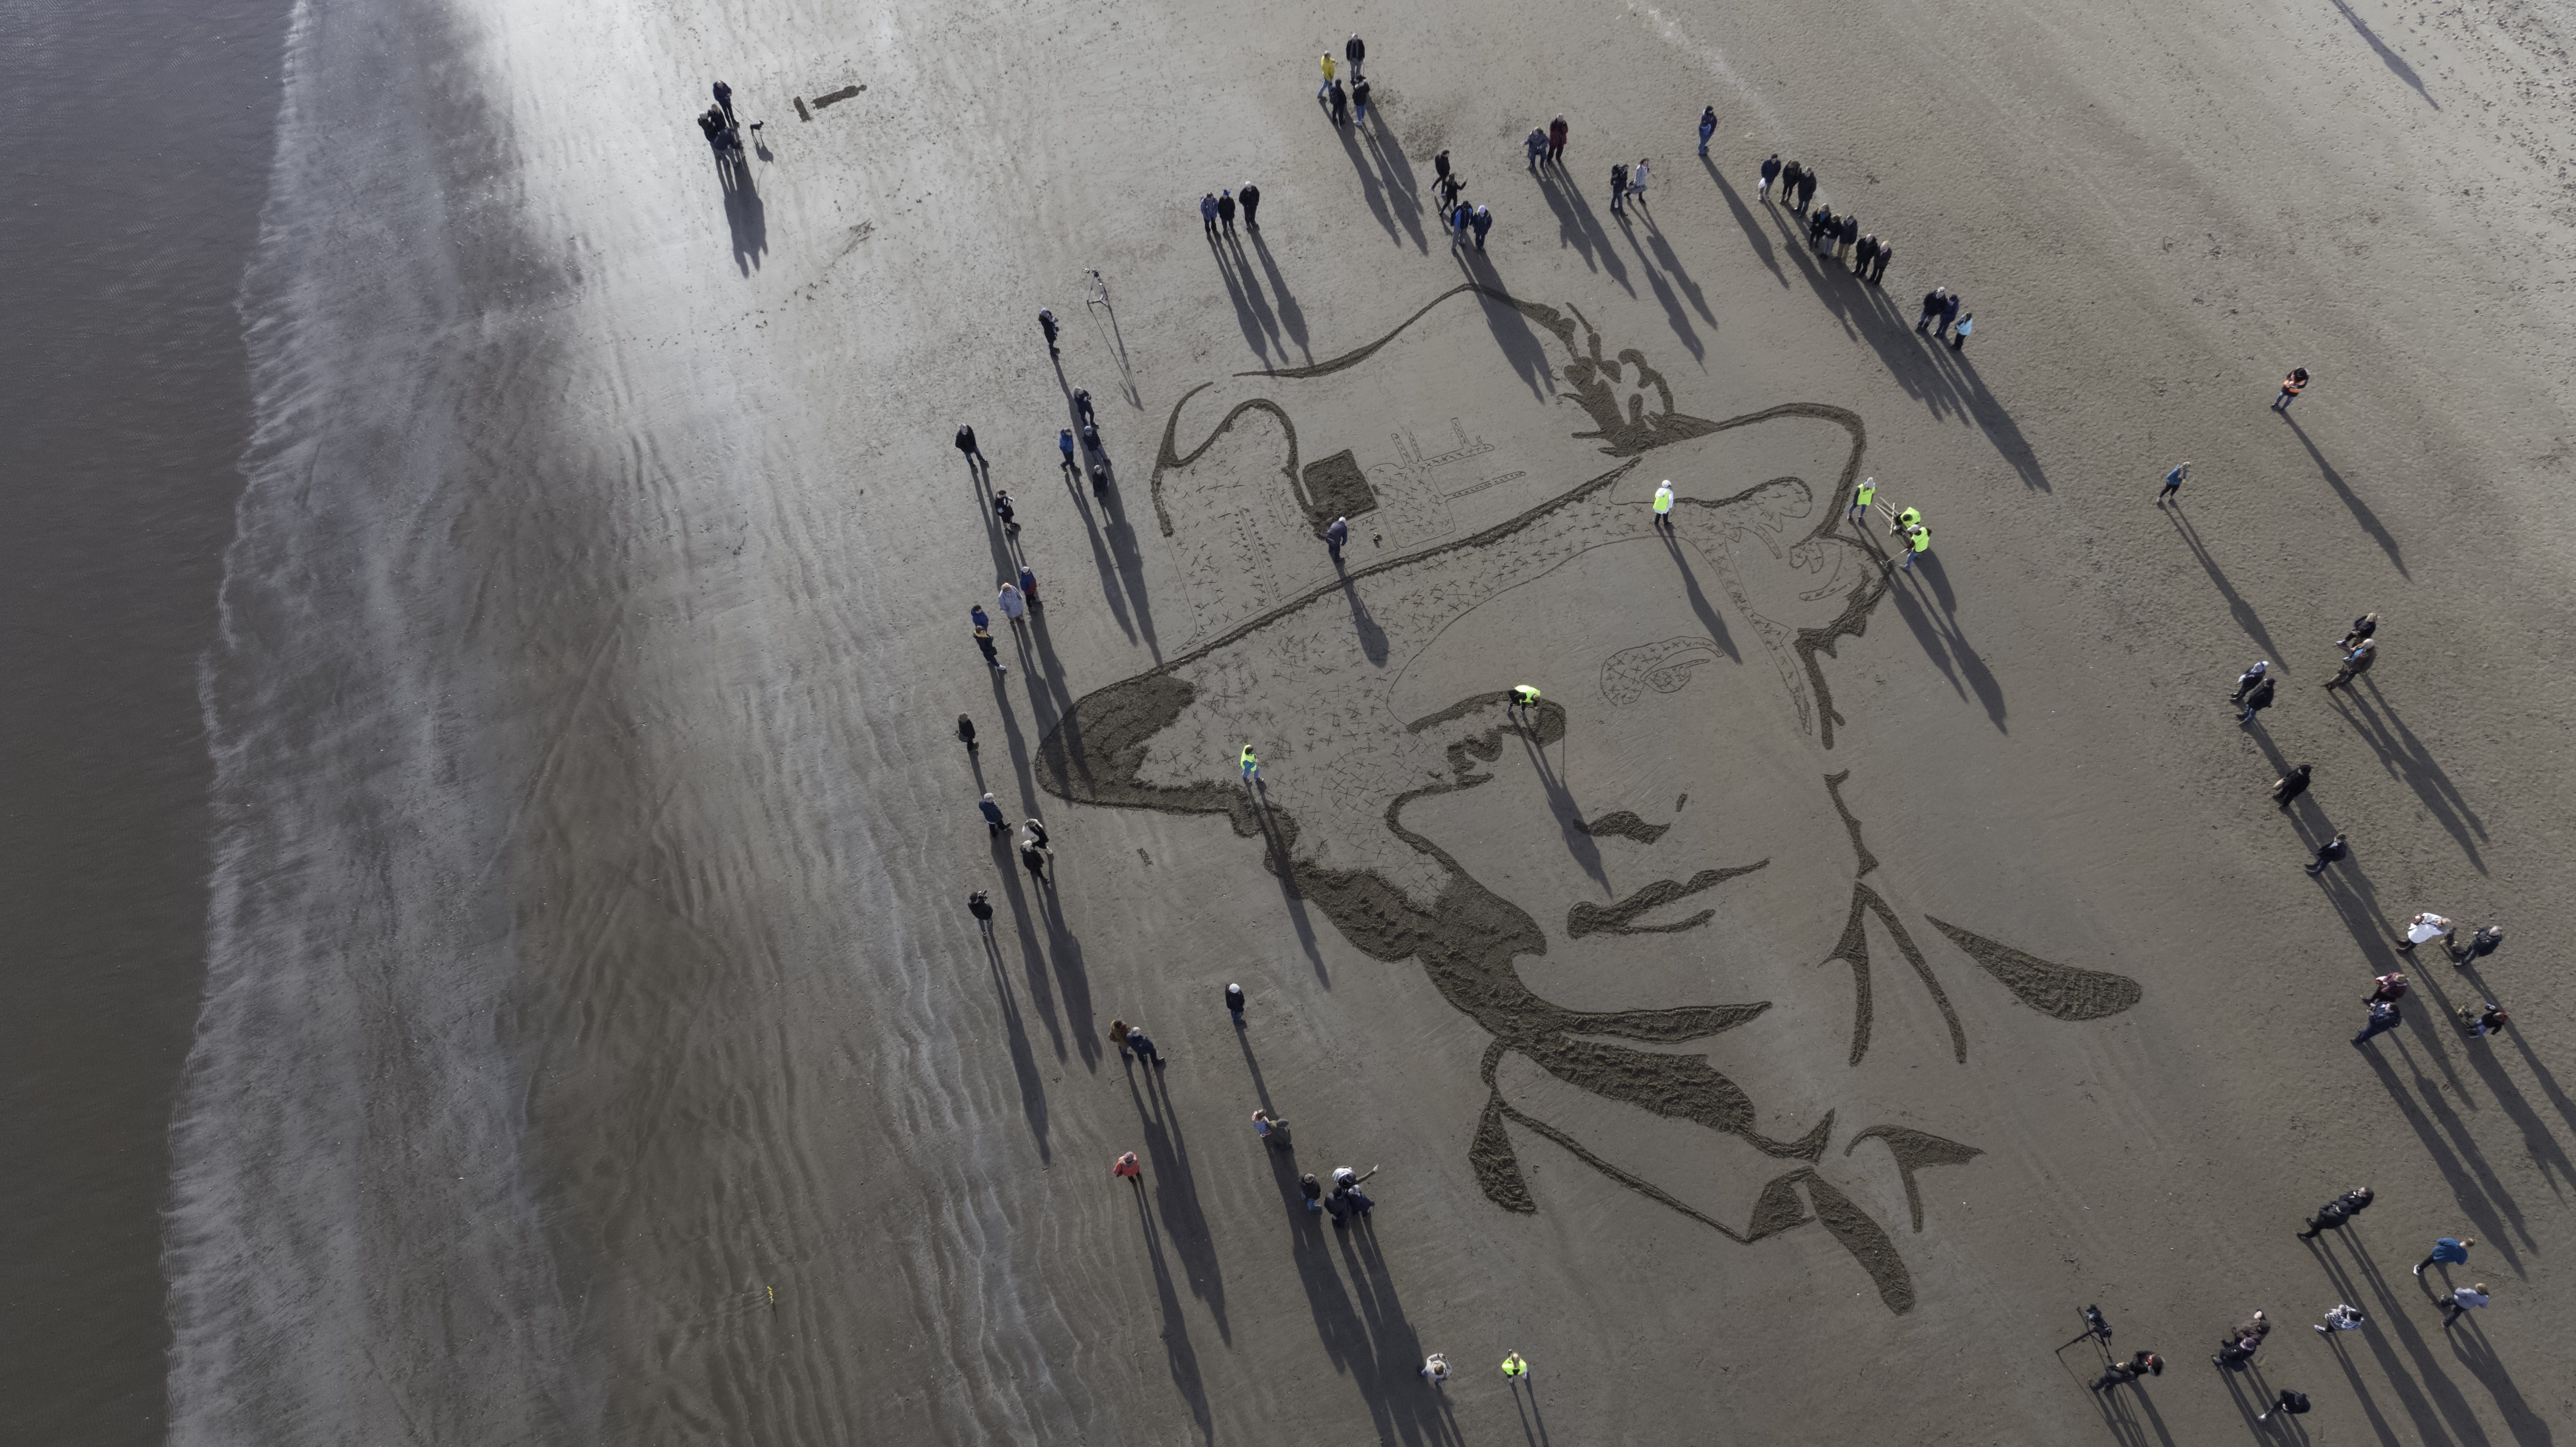 Portrait in progress. Hundreds of spectators look on as a large scale portrait of Dr Elsie Inglis who set up hospitals during WW1 is created on West Sands Beach in St Andrews.